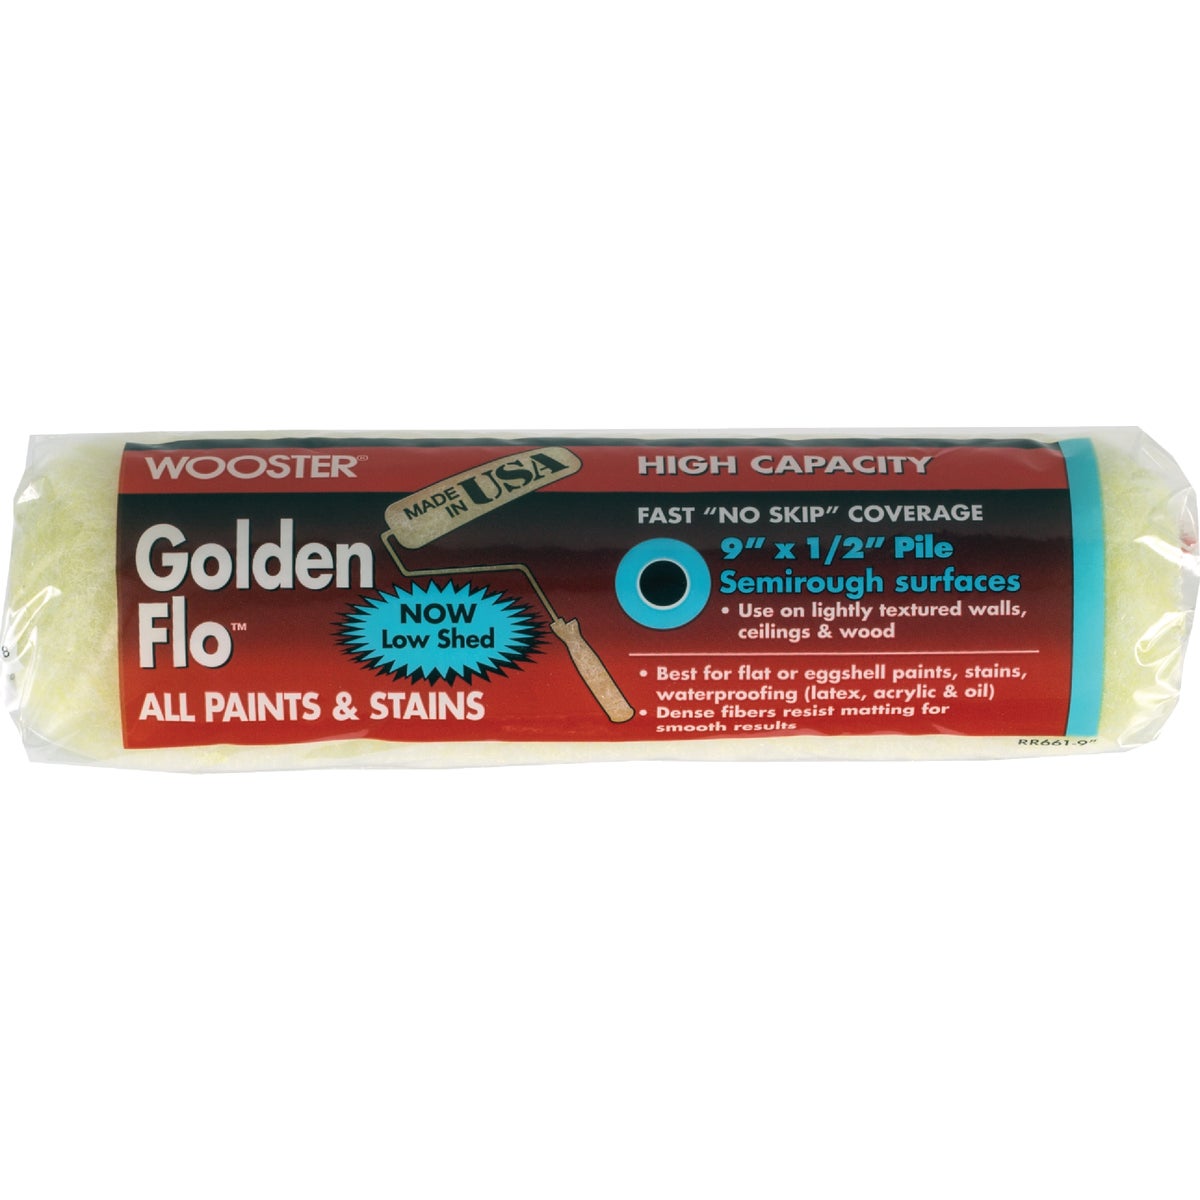 Wooster Golden Flo 9 In. x 1/2 In. Knit Fabric Roller Cover